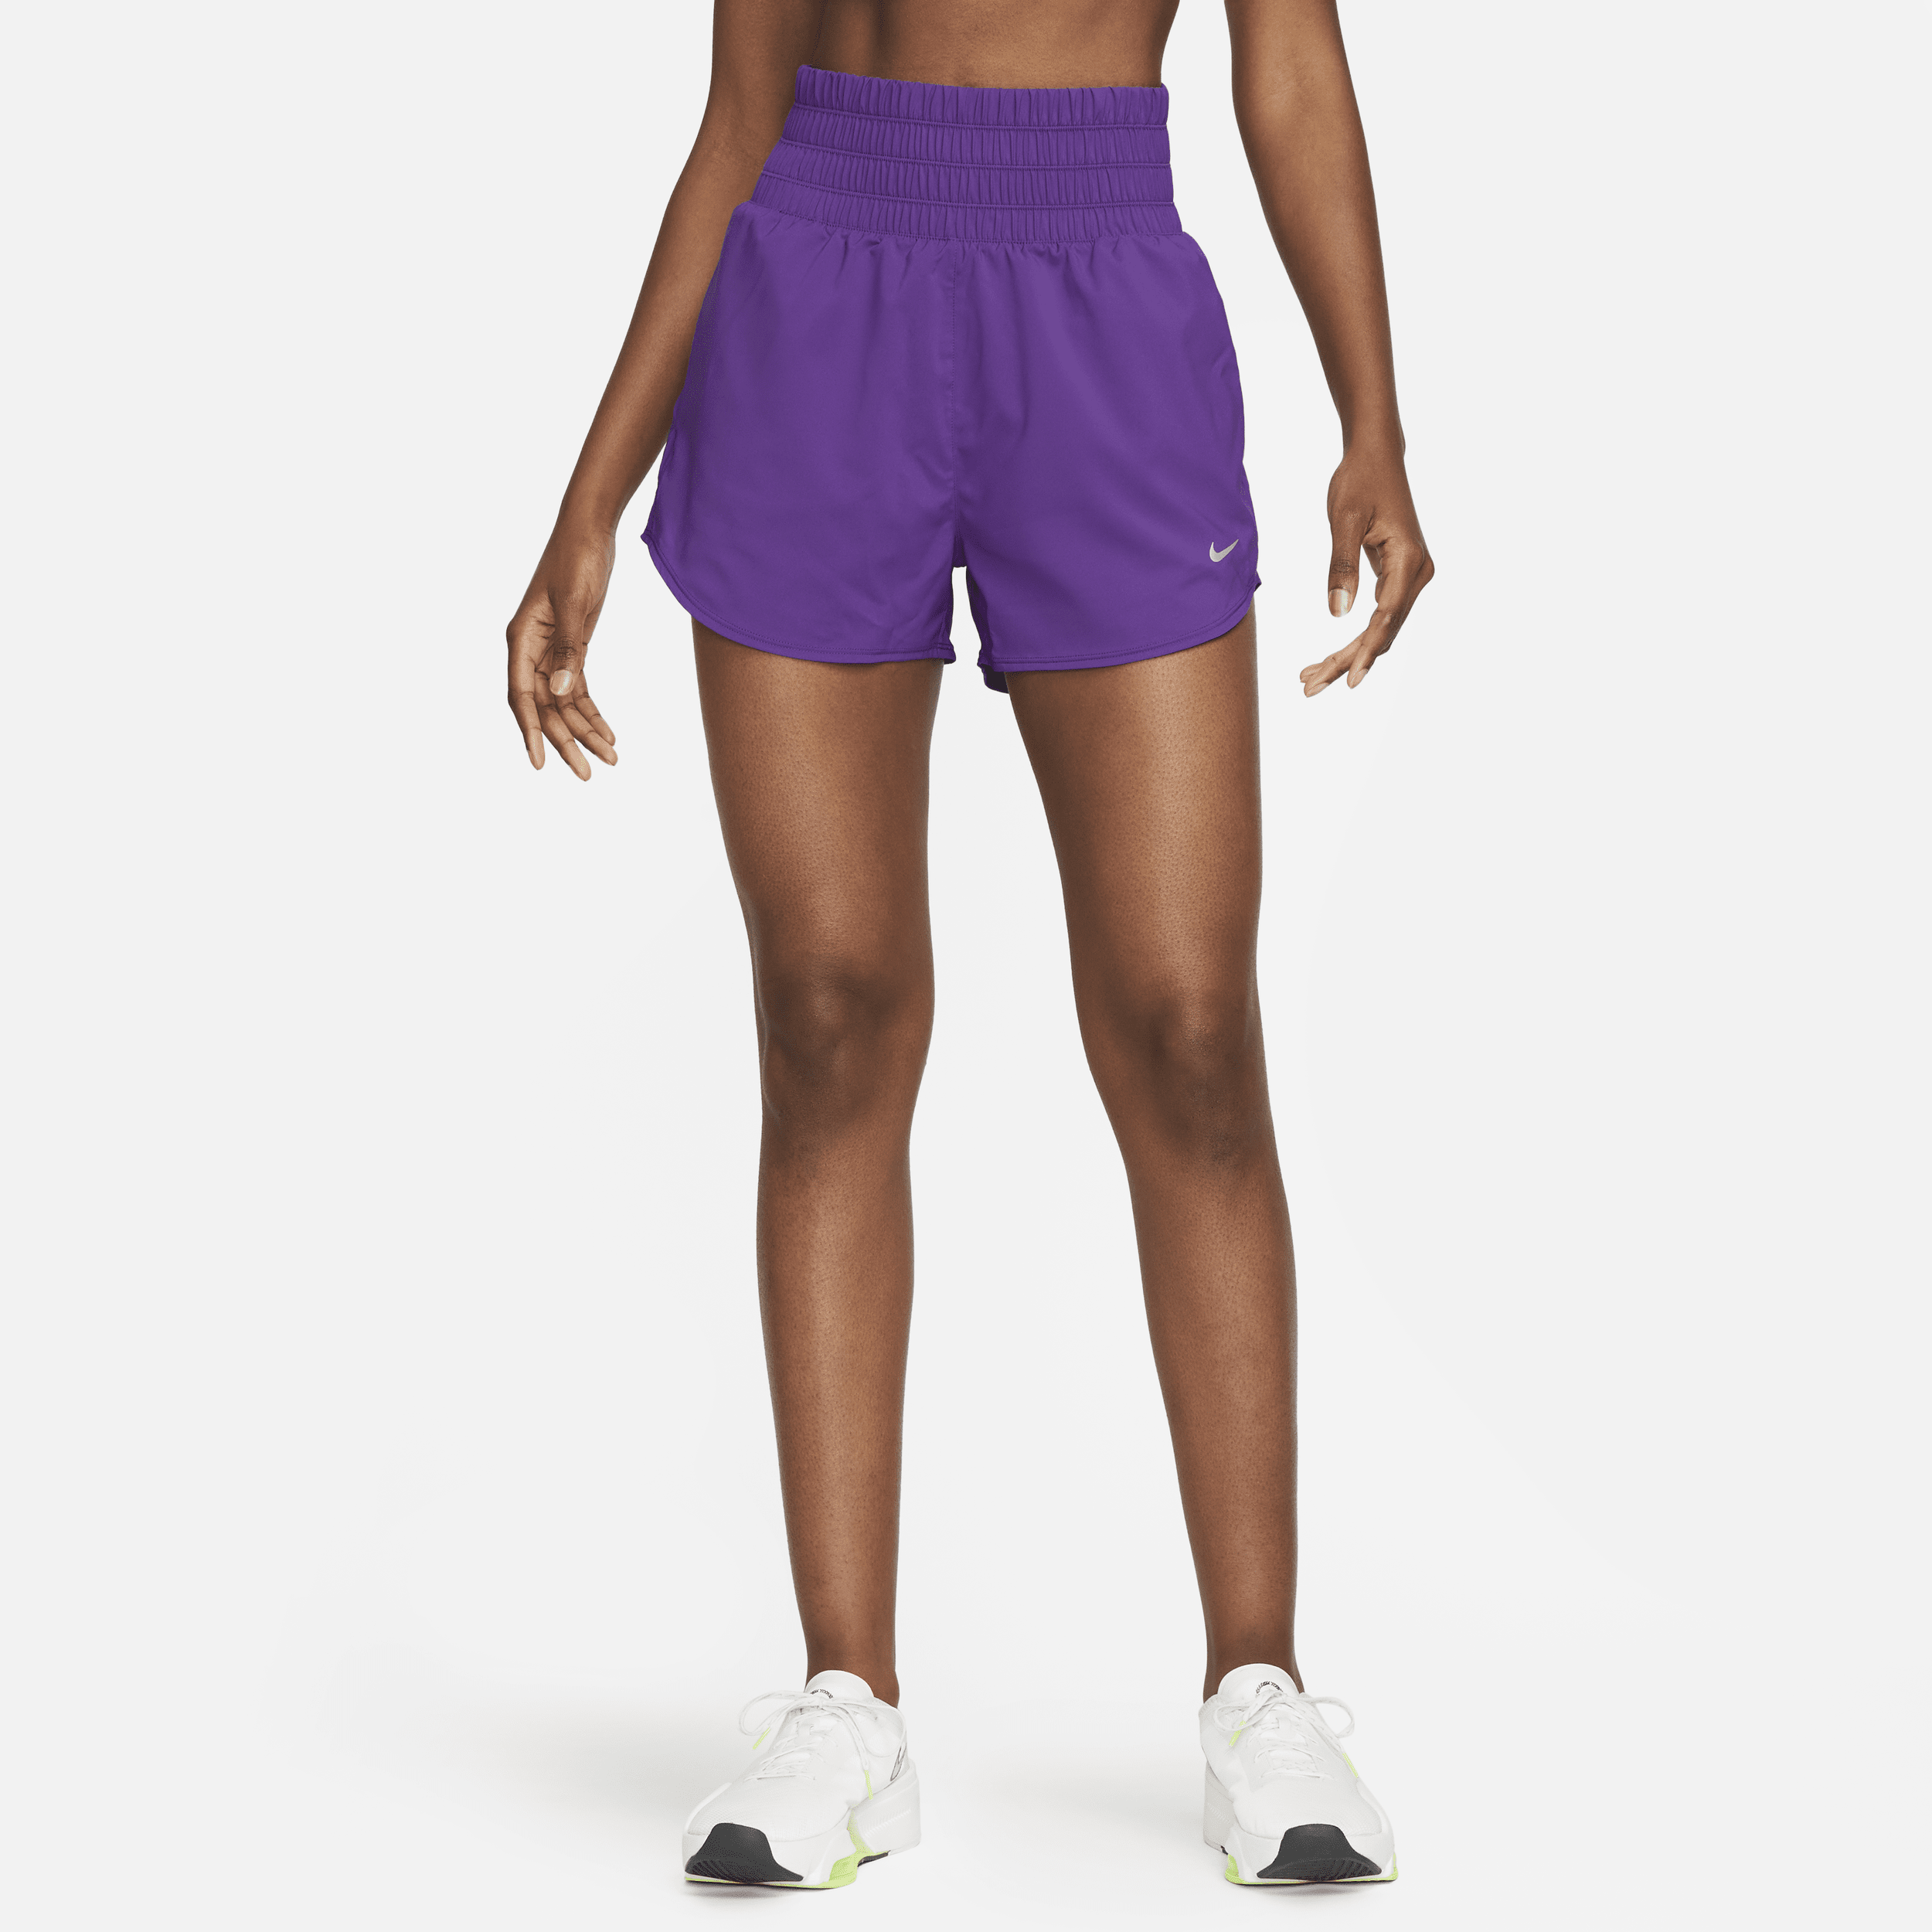 NIKE WOMEN'S ONE DRI-FIT ULTRA HIGH-WAISTED 3" BRIEF-LINED SHORTS,1012458357